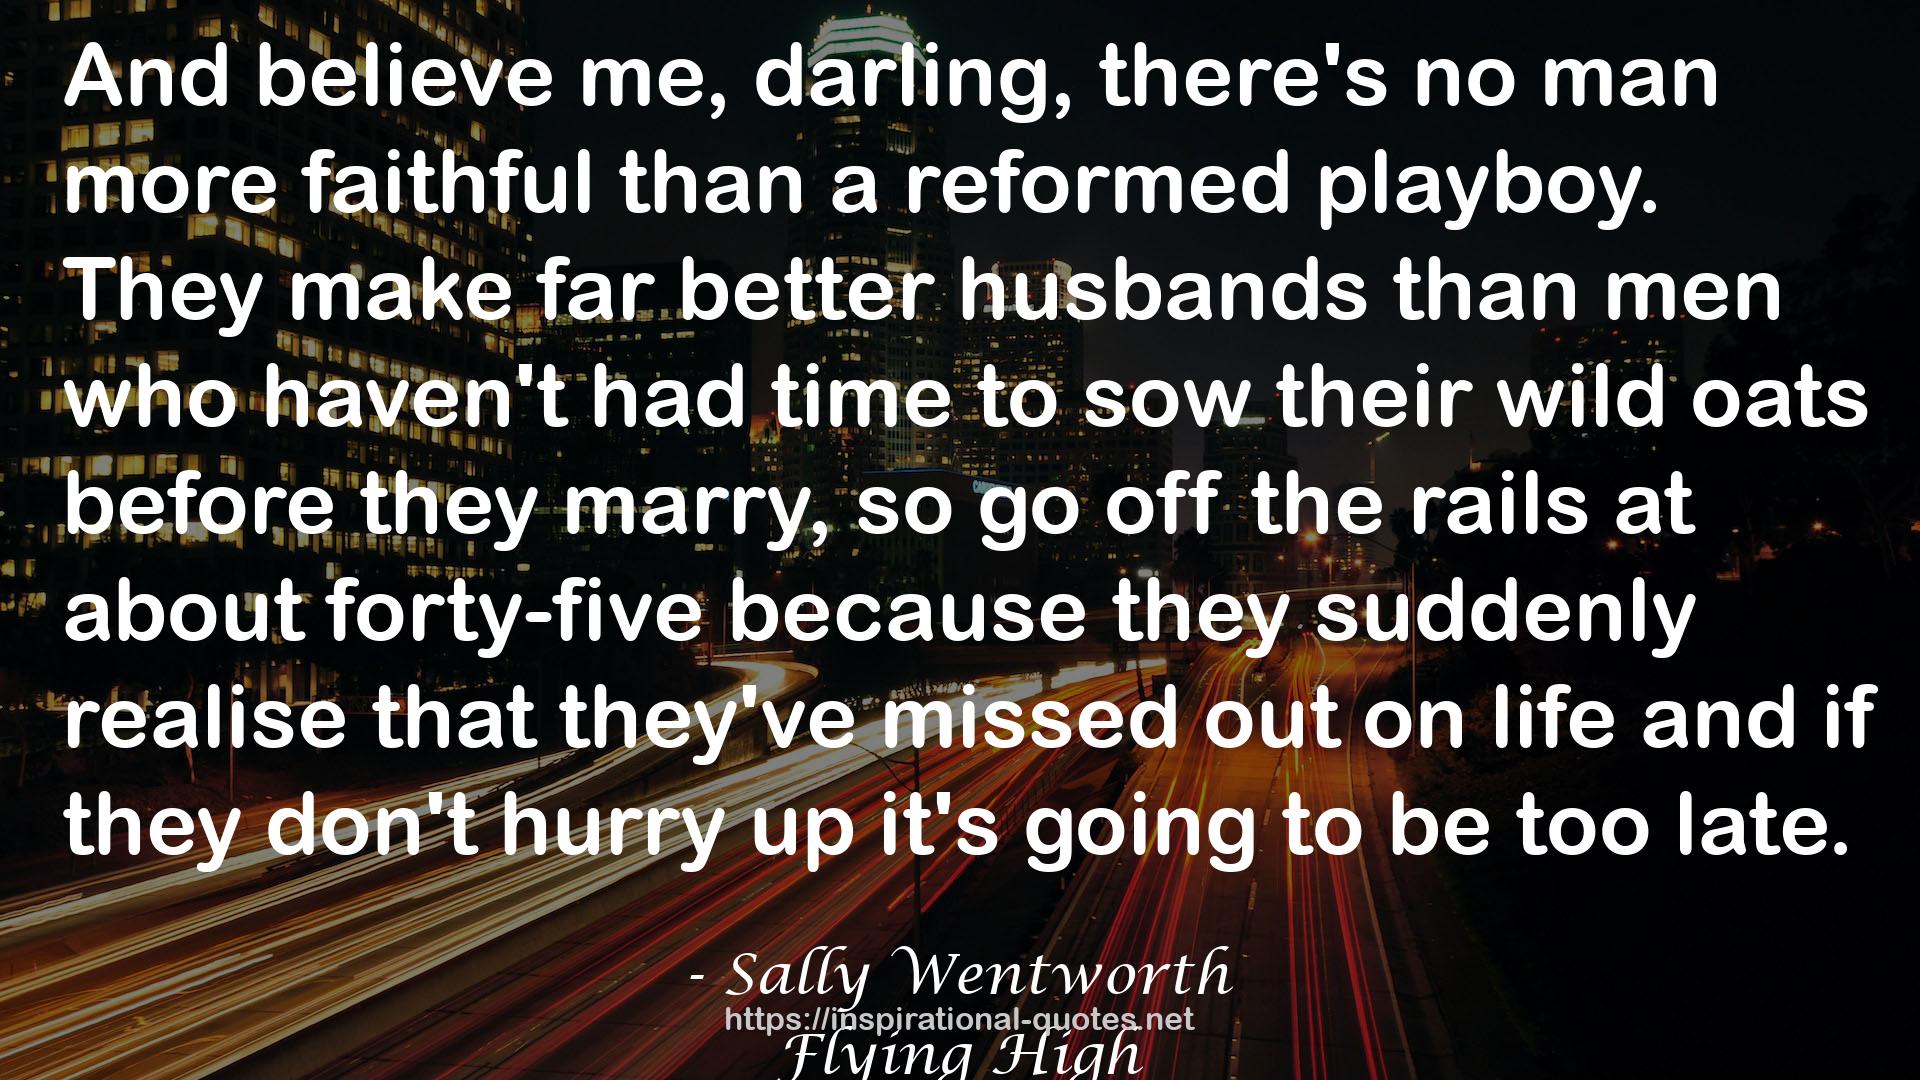 Sally Wentworth QUOTES